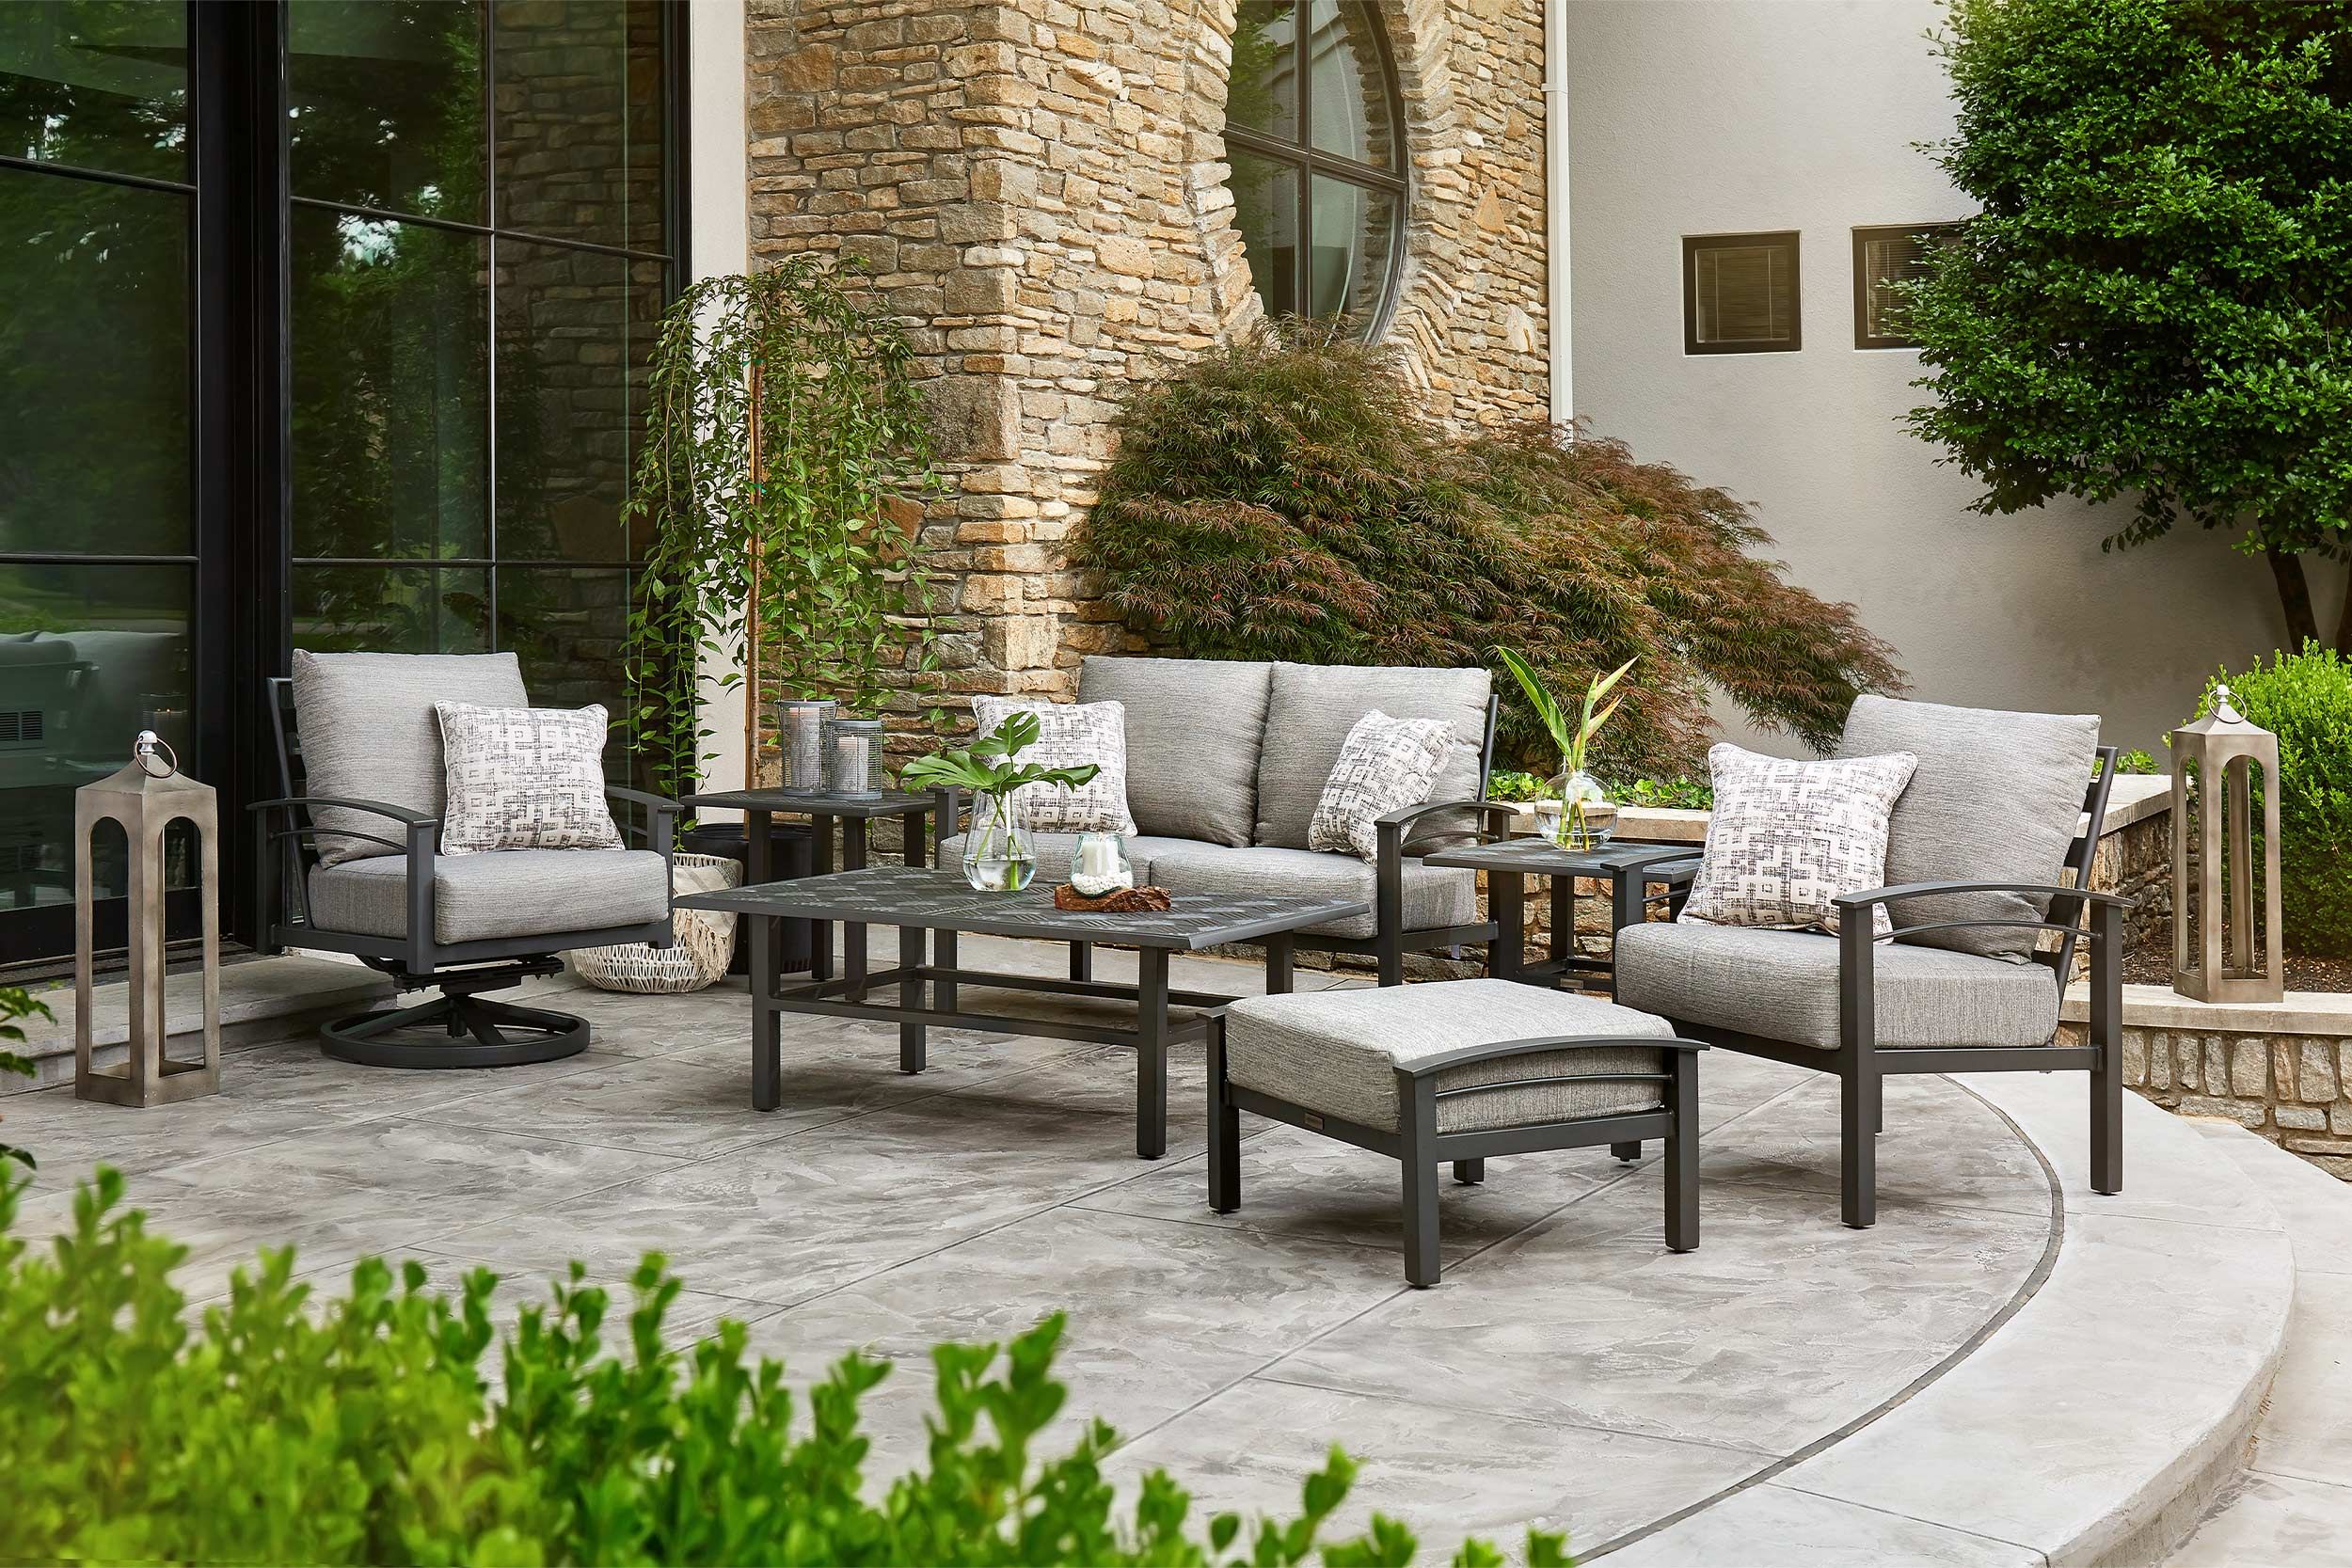 Luxury Outdoor Patio Furniture | Winston Furniture With Regard To Side Table Iron Frame Patio Furniture Set (View 12 of 15)